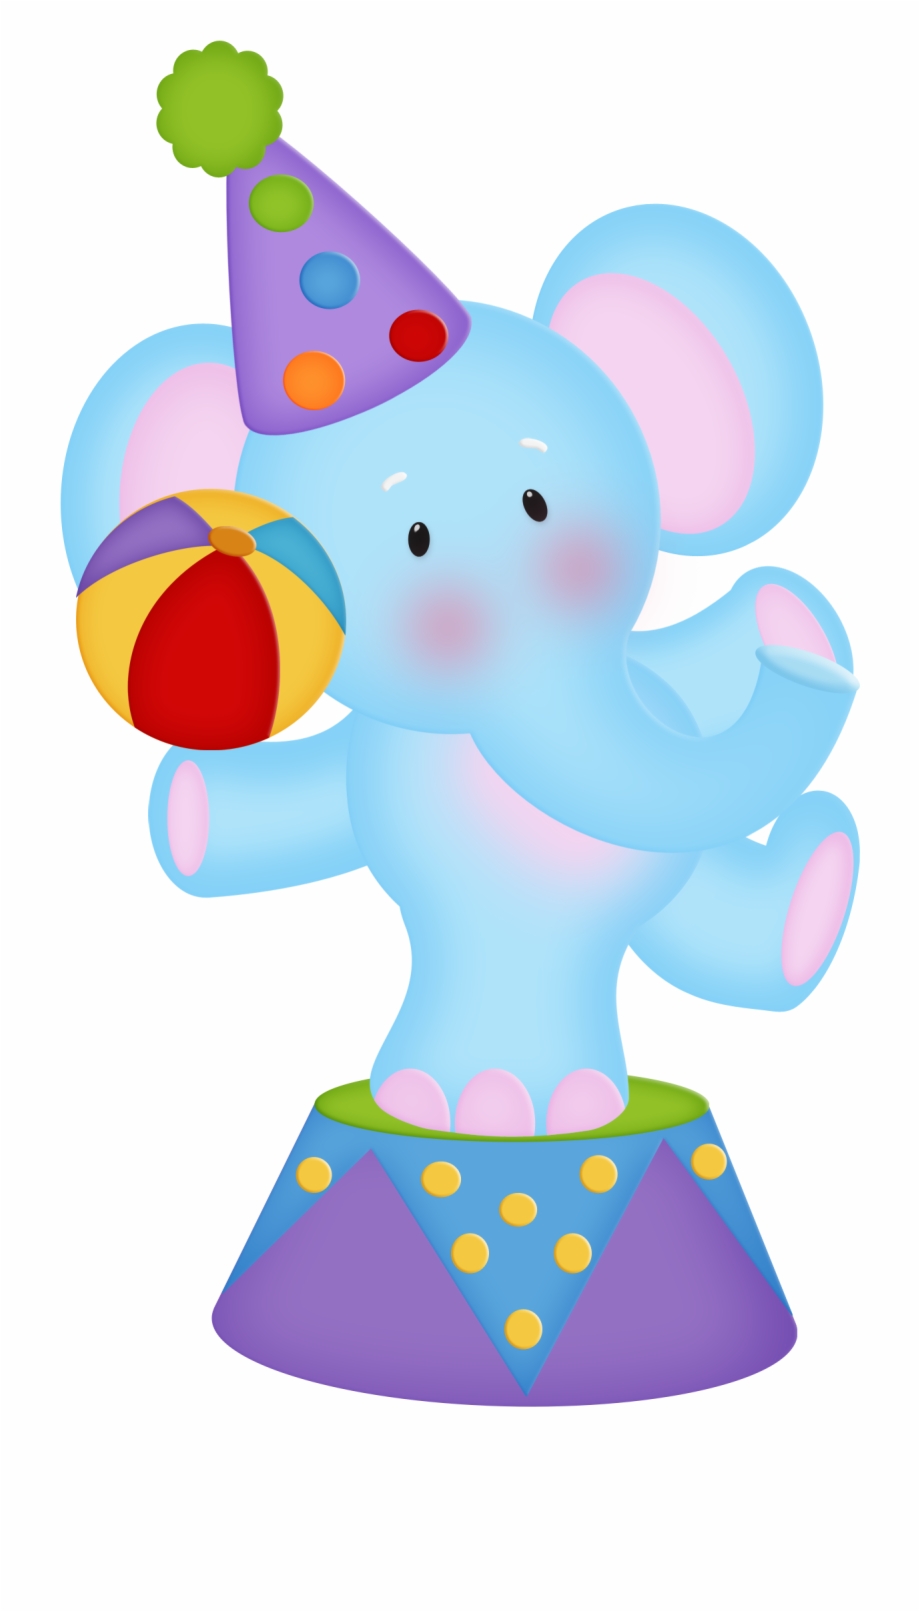 Free Circus Clipart Png, Download Free Clip Art, Free Clip